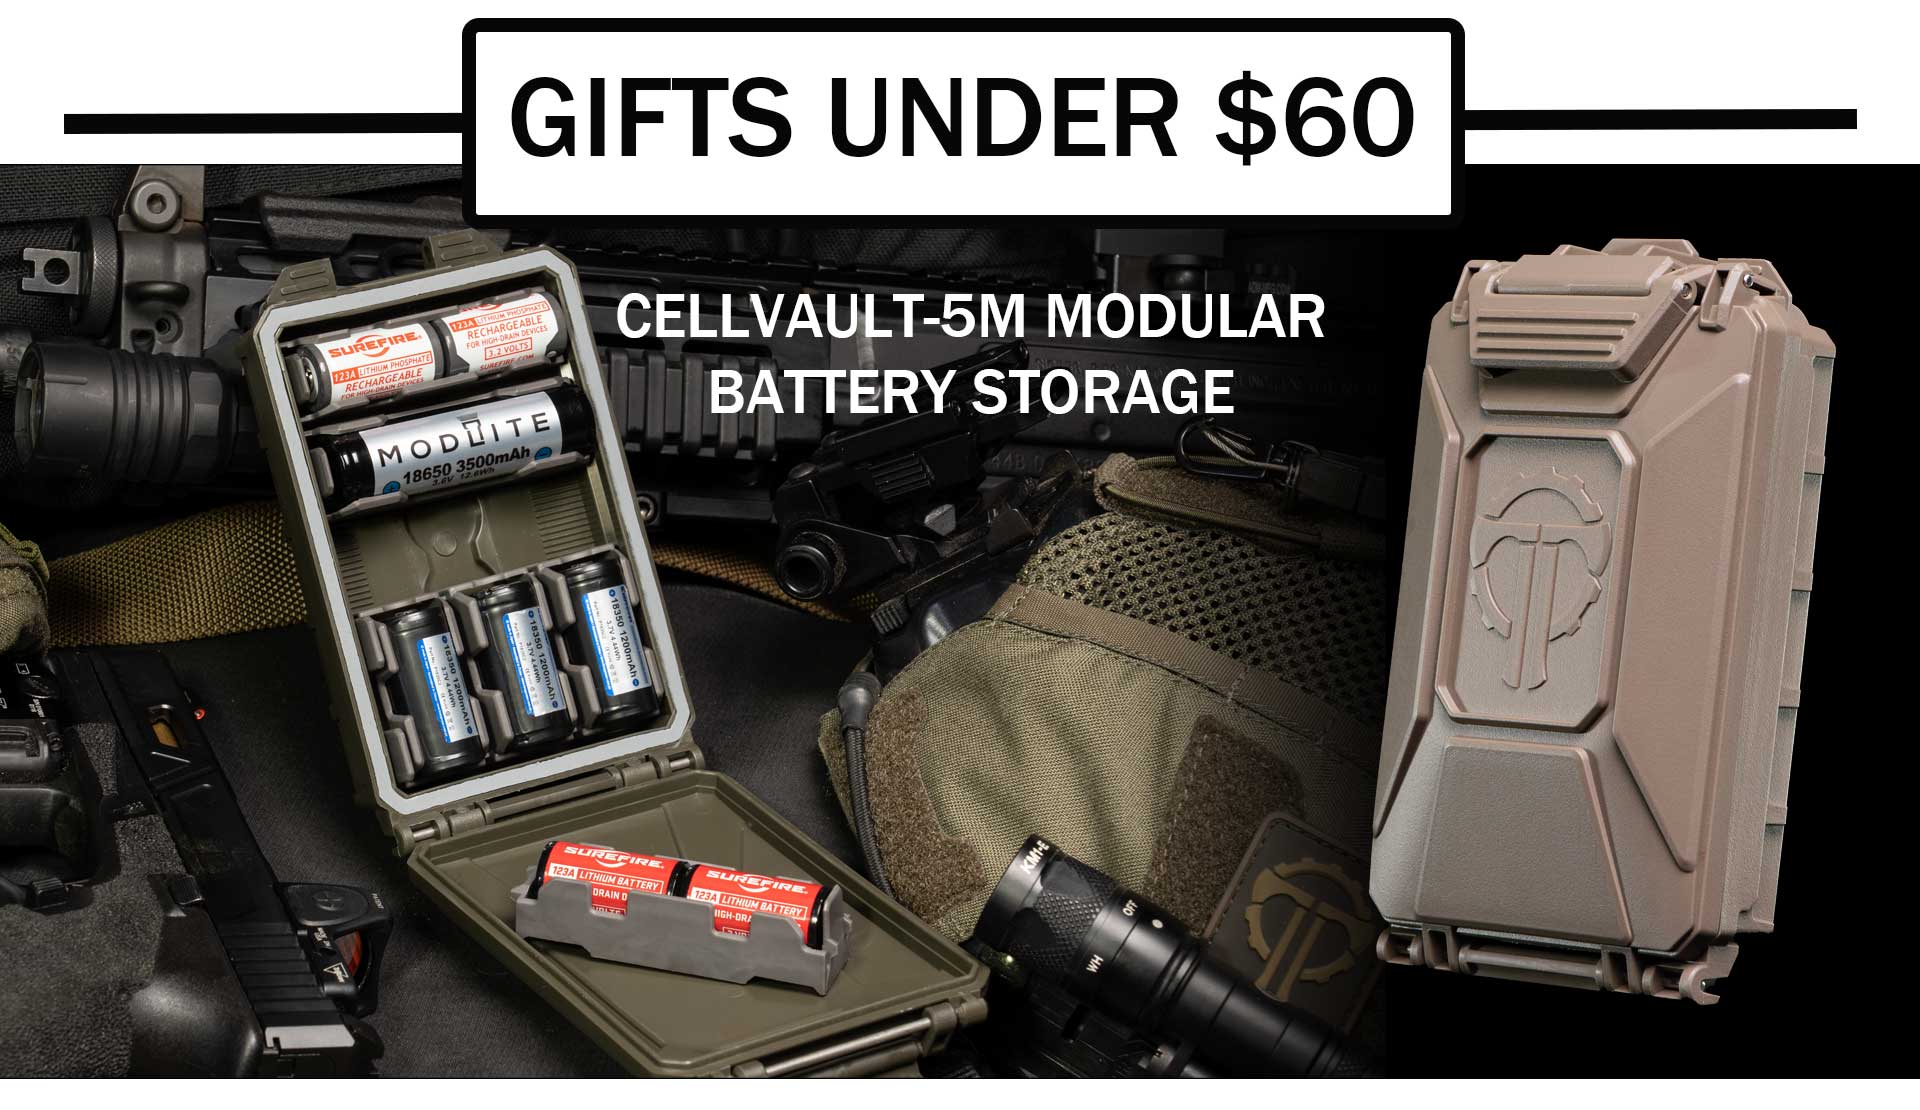 CellVault-5M Modular Battery Storage showing batteries within